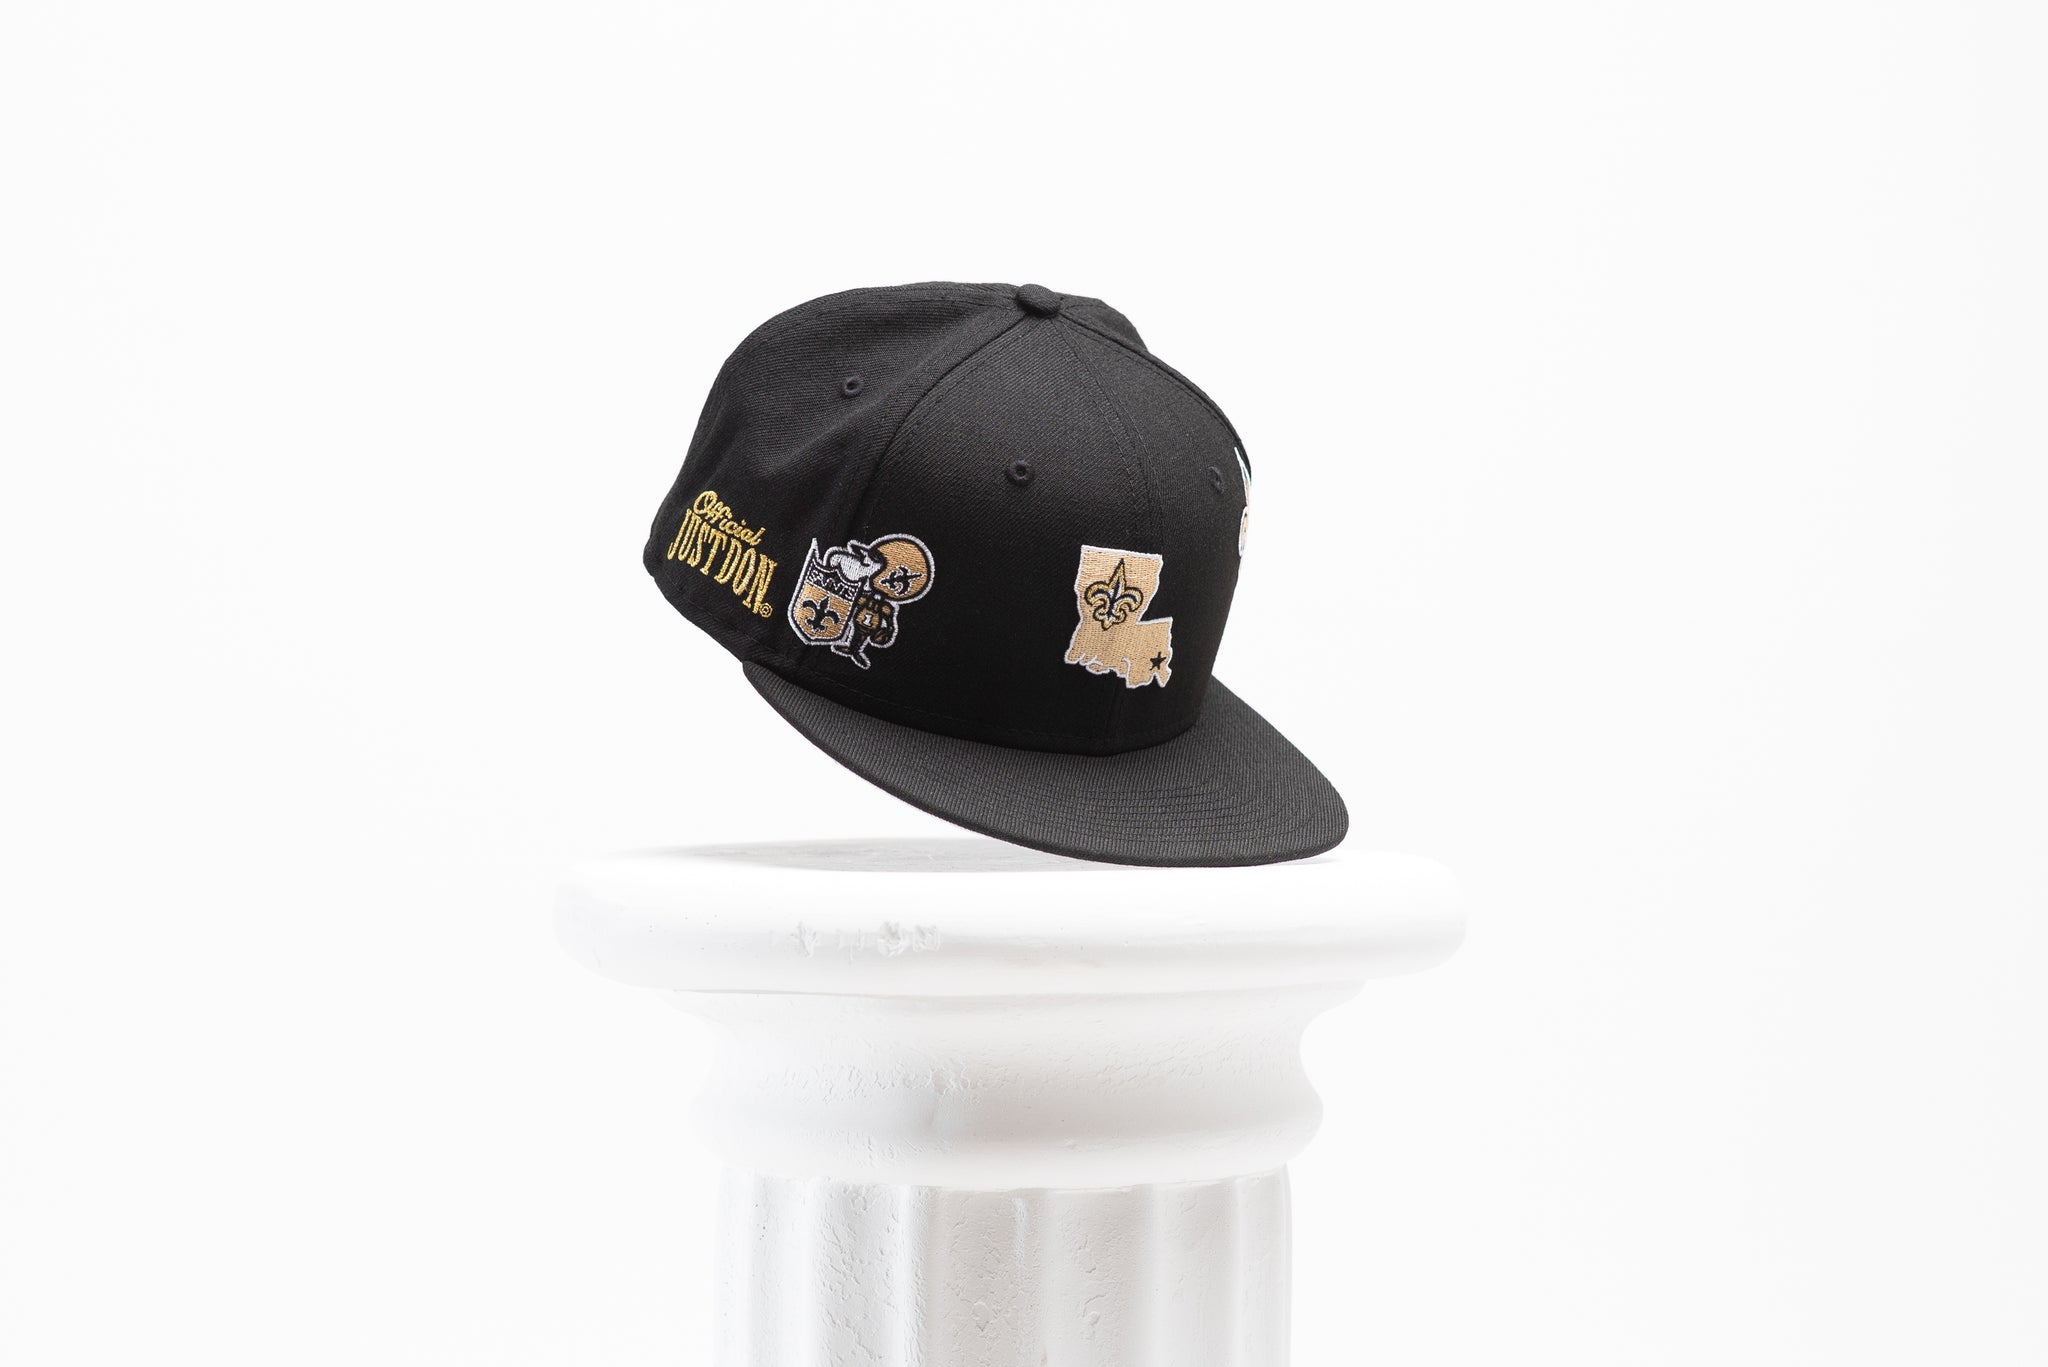 Just Don x New Orleans Saints 59FIFTY Fitted - Black/Gold, Size 8 by Sneaker Politics